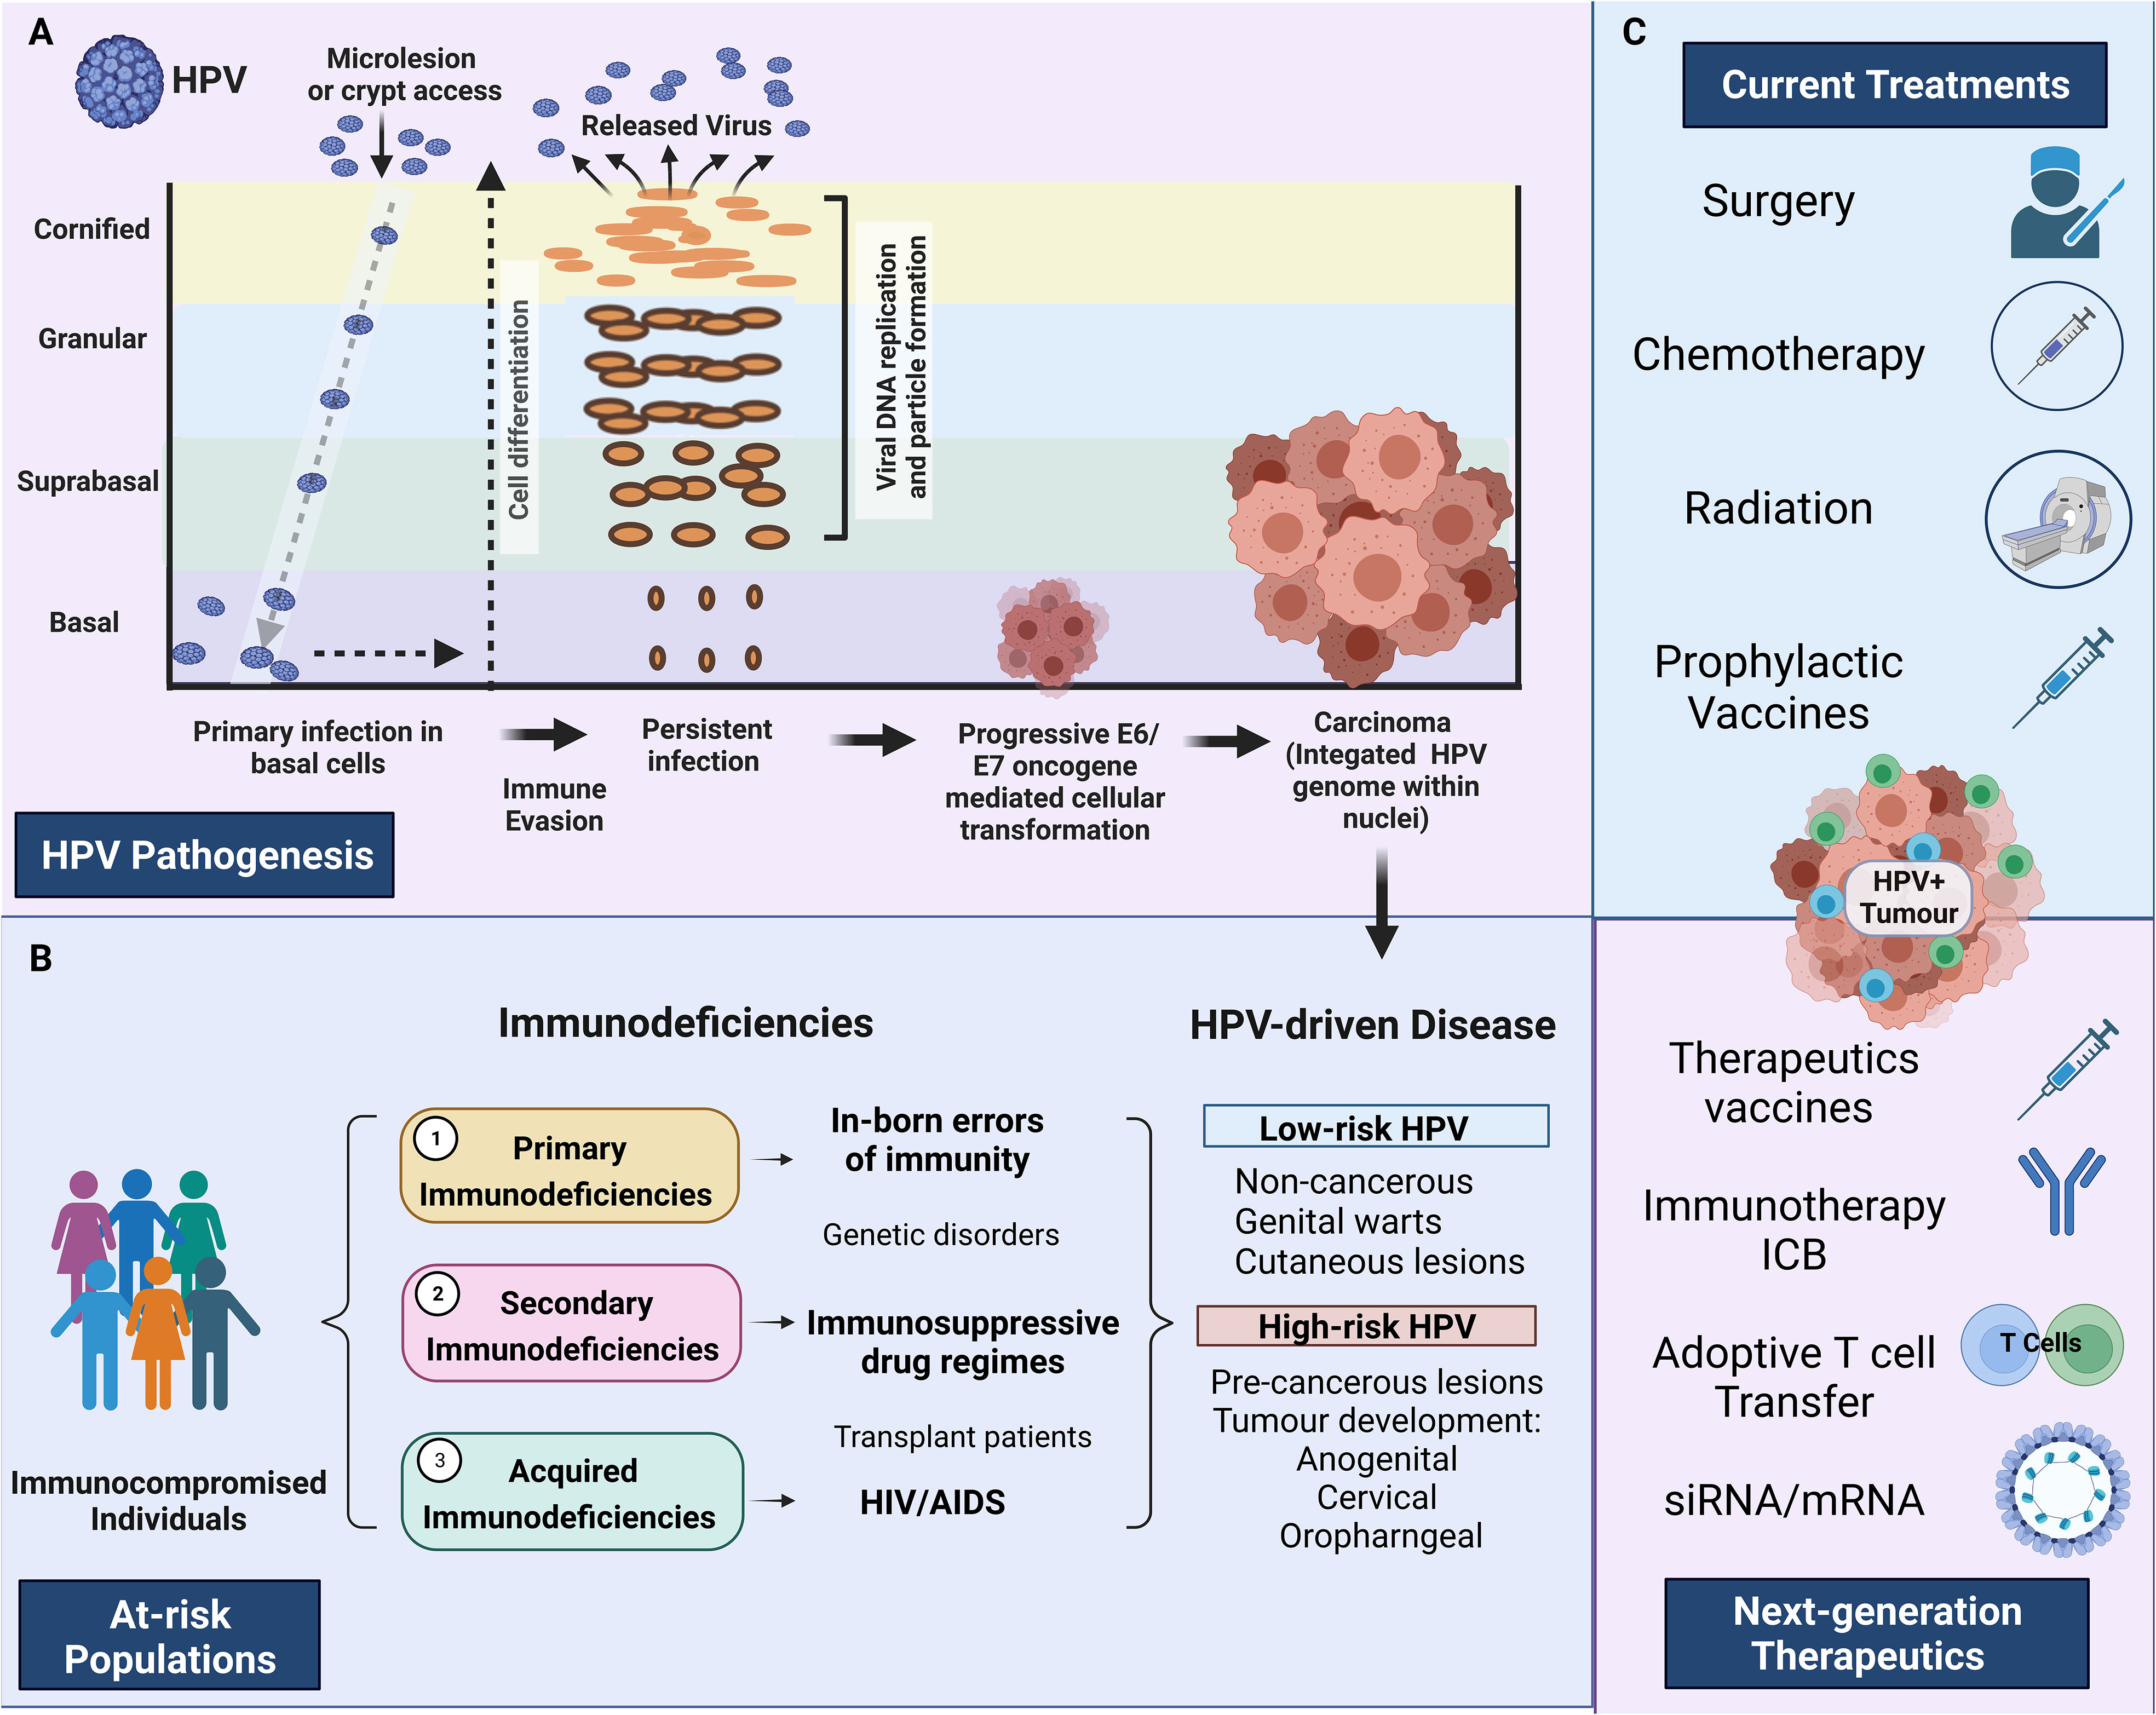 Frontiers Human papillomavirus in the setting of immunodeficiency Pathogenesis and the emergence of next-generation therapies to reduce the high associated cancer risk